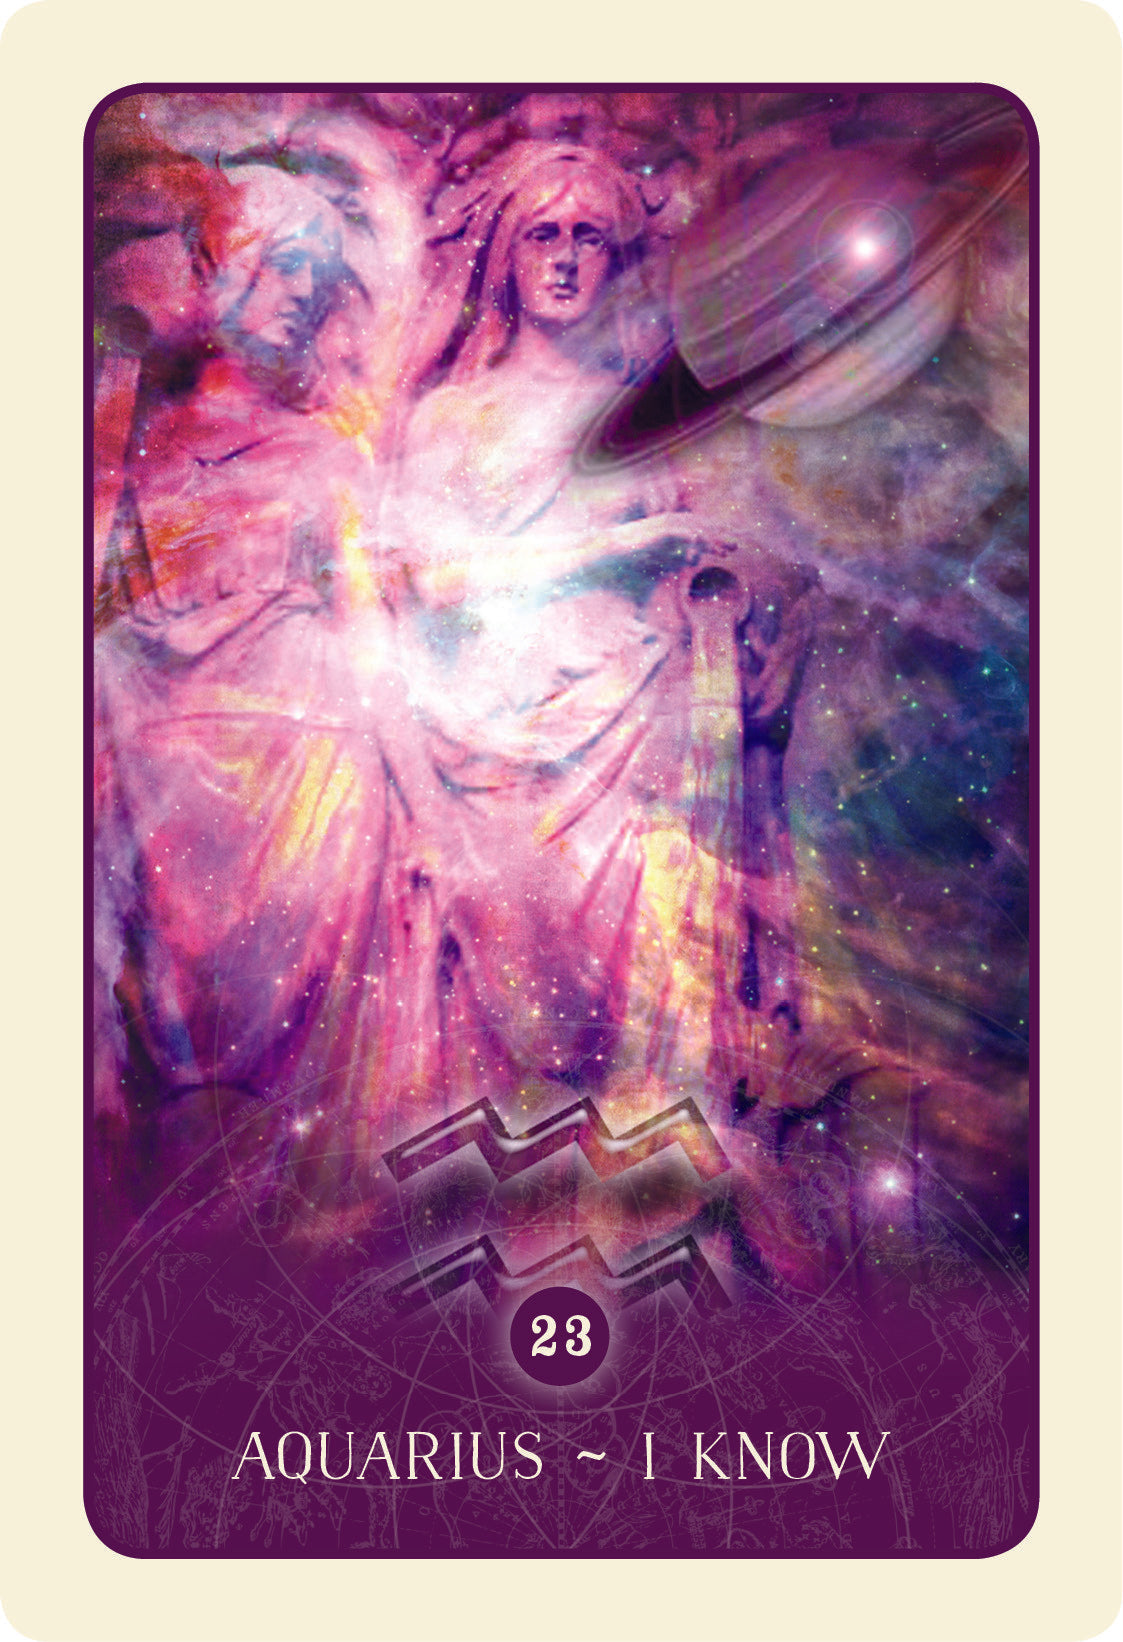 card labeled "aquarius - I know." Card depicts the astrological symbol for Aquarius, and a purple goddess figure next to the planet Saturn.